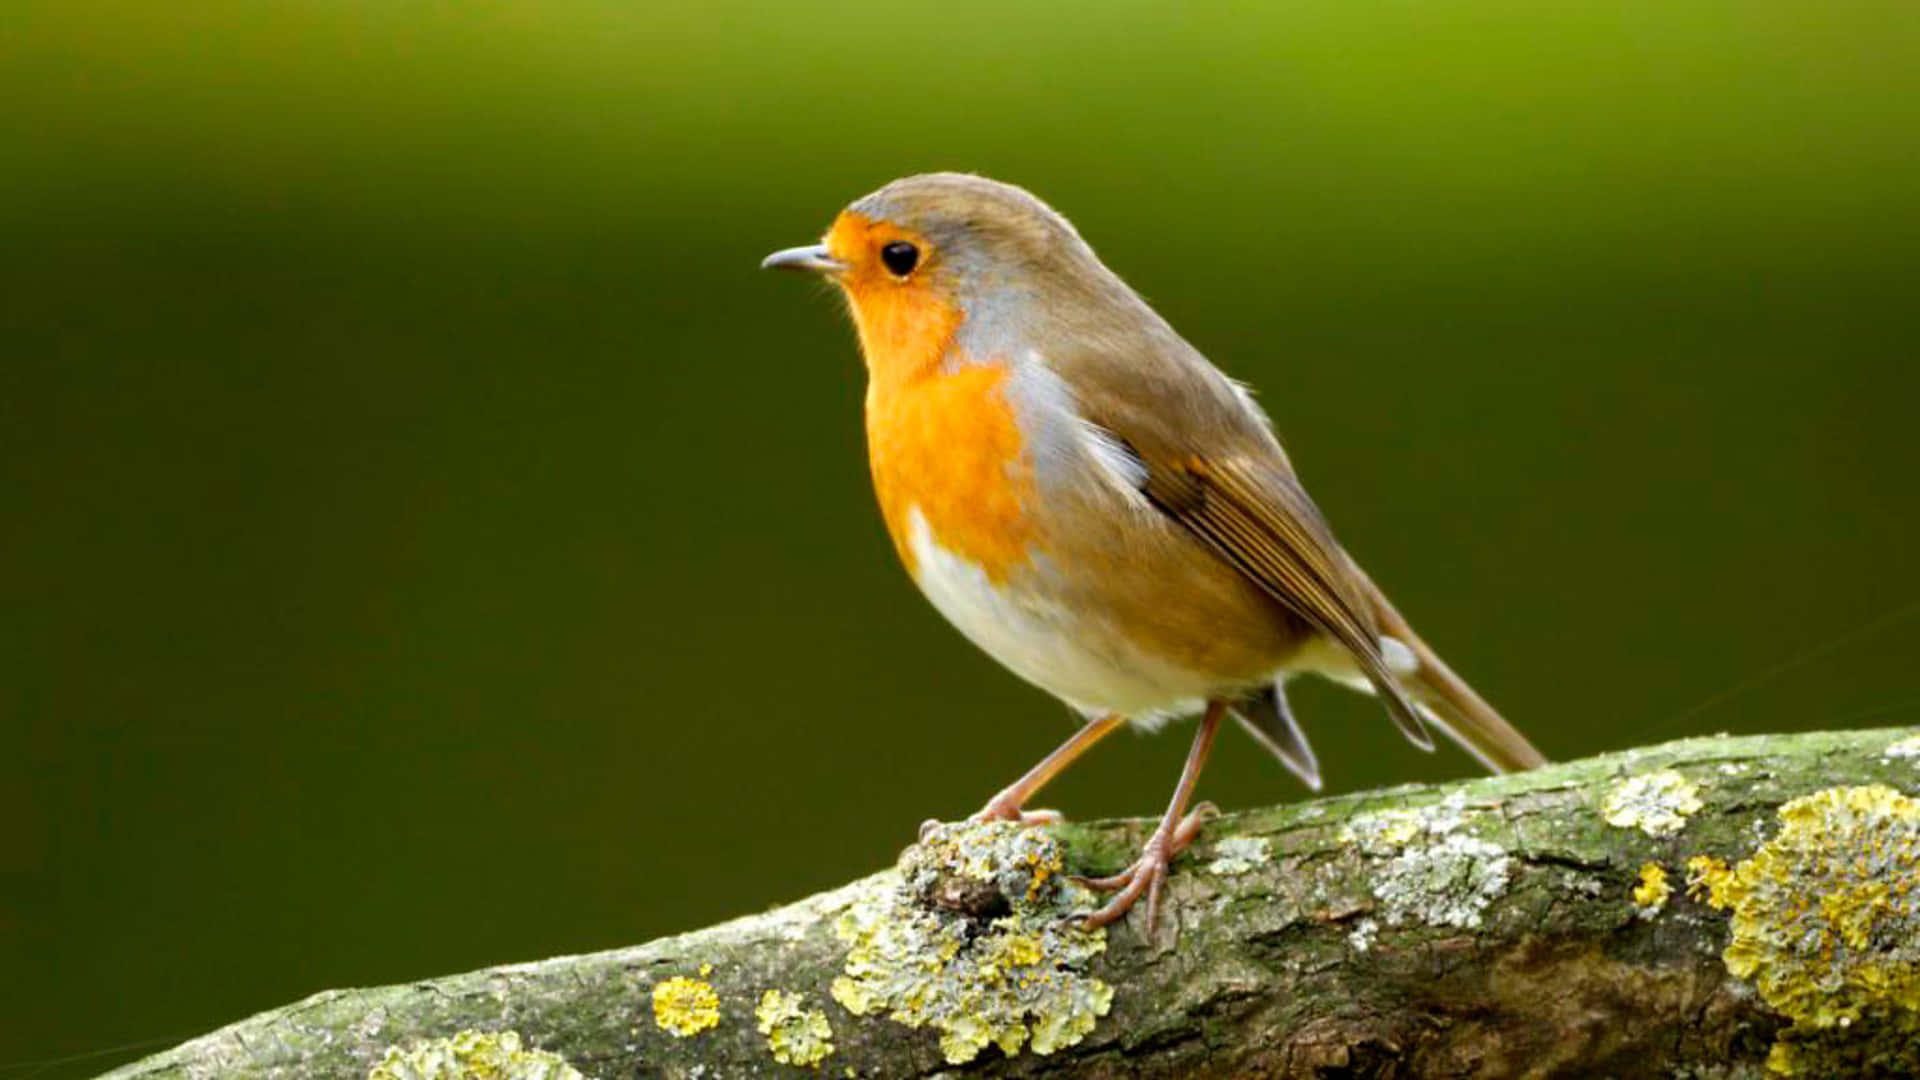 An orange-breasted robin perched on top of a grass-covered log